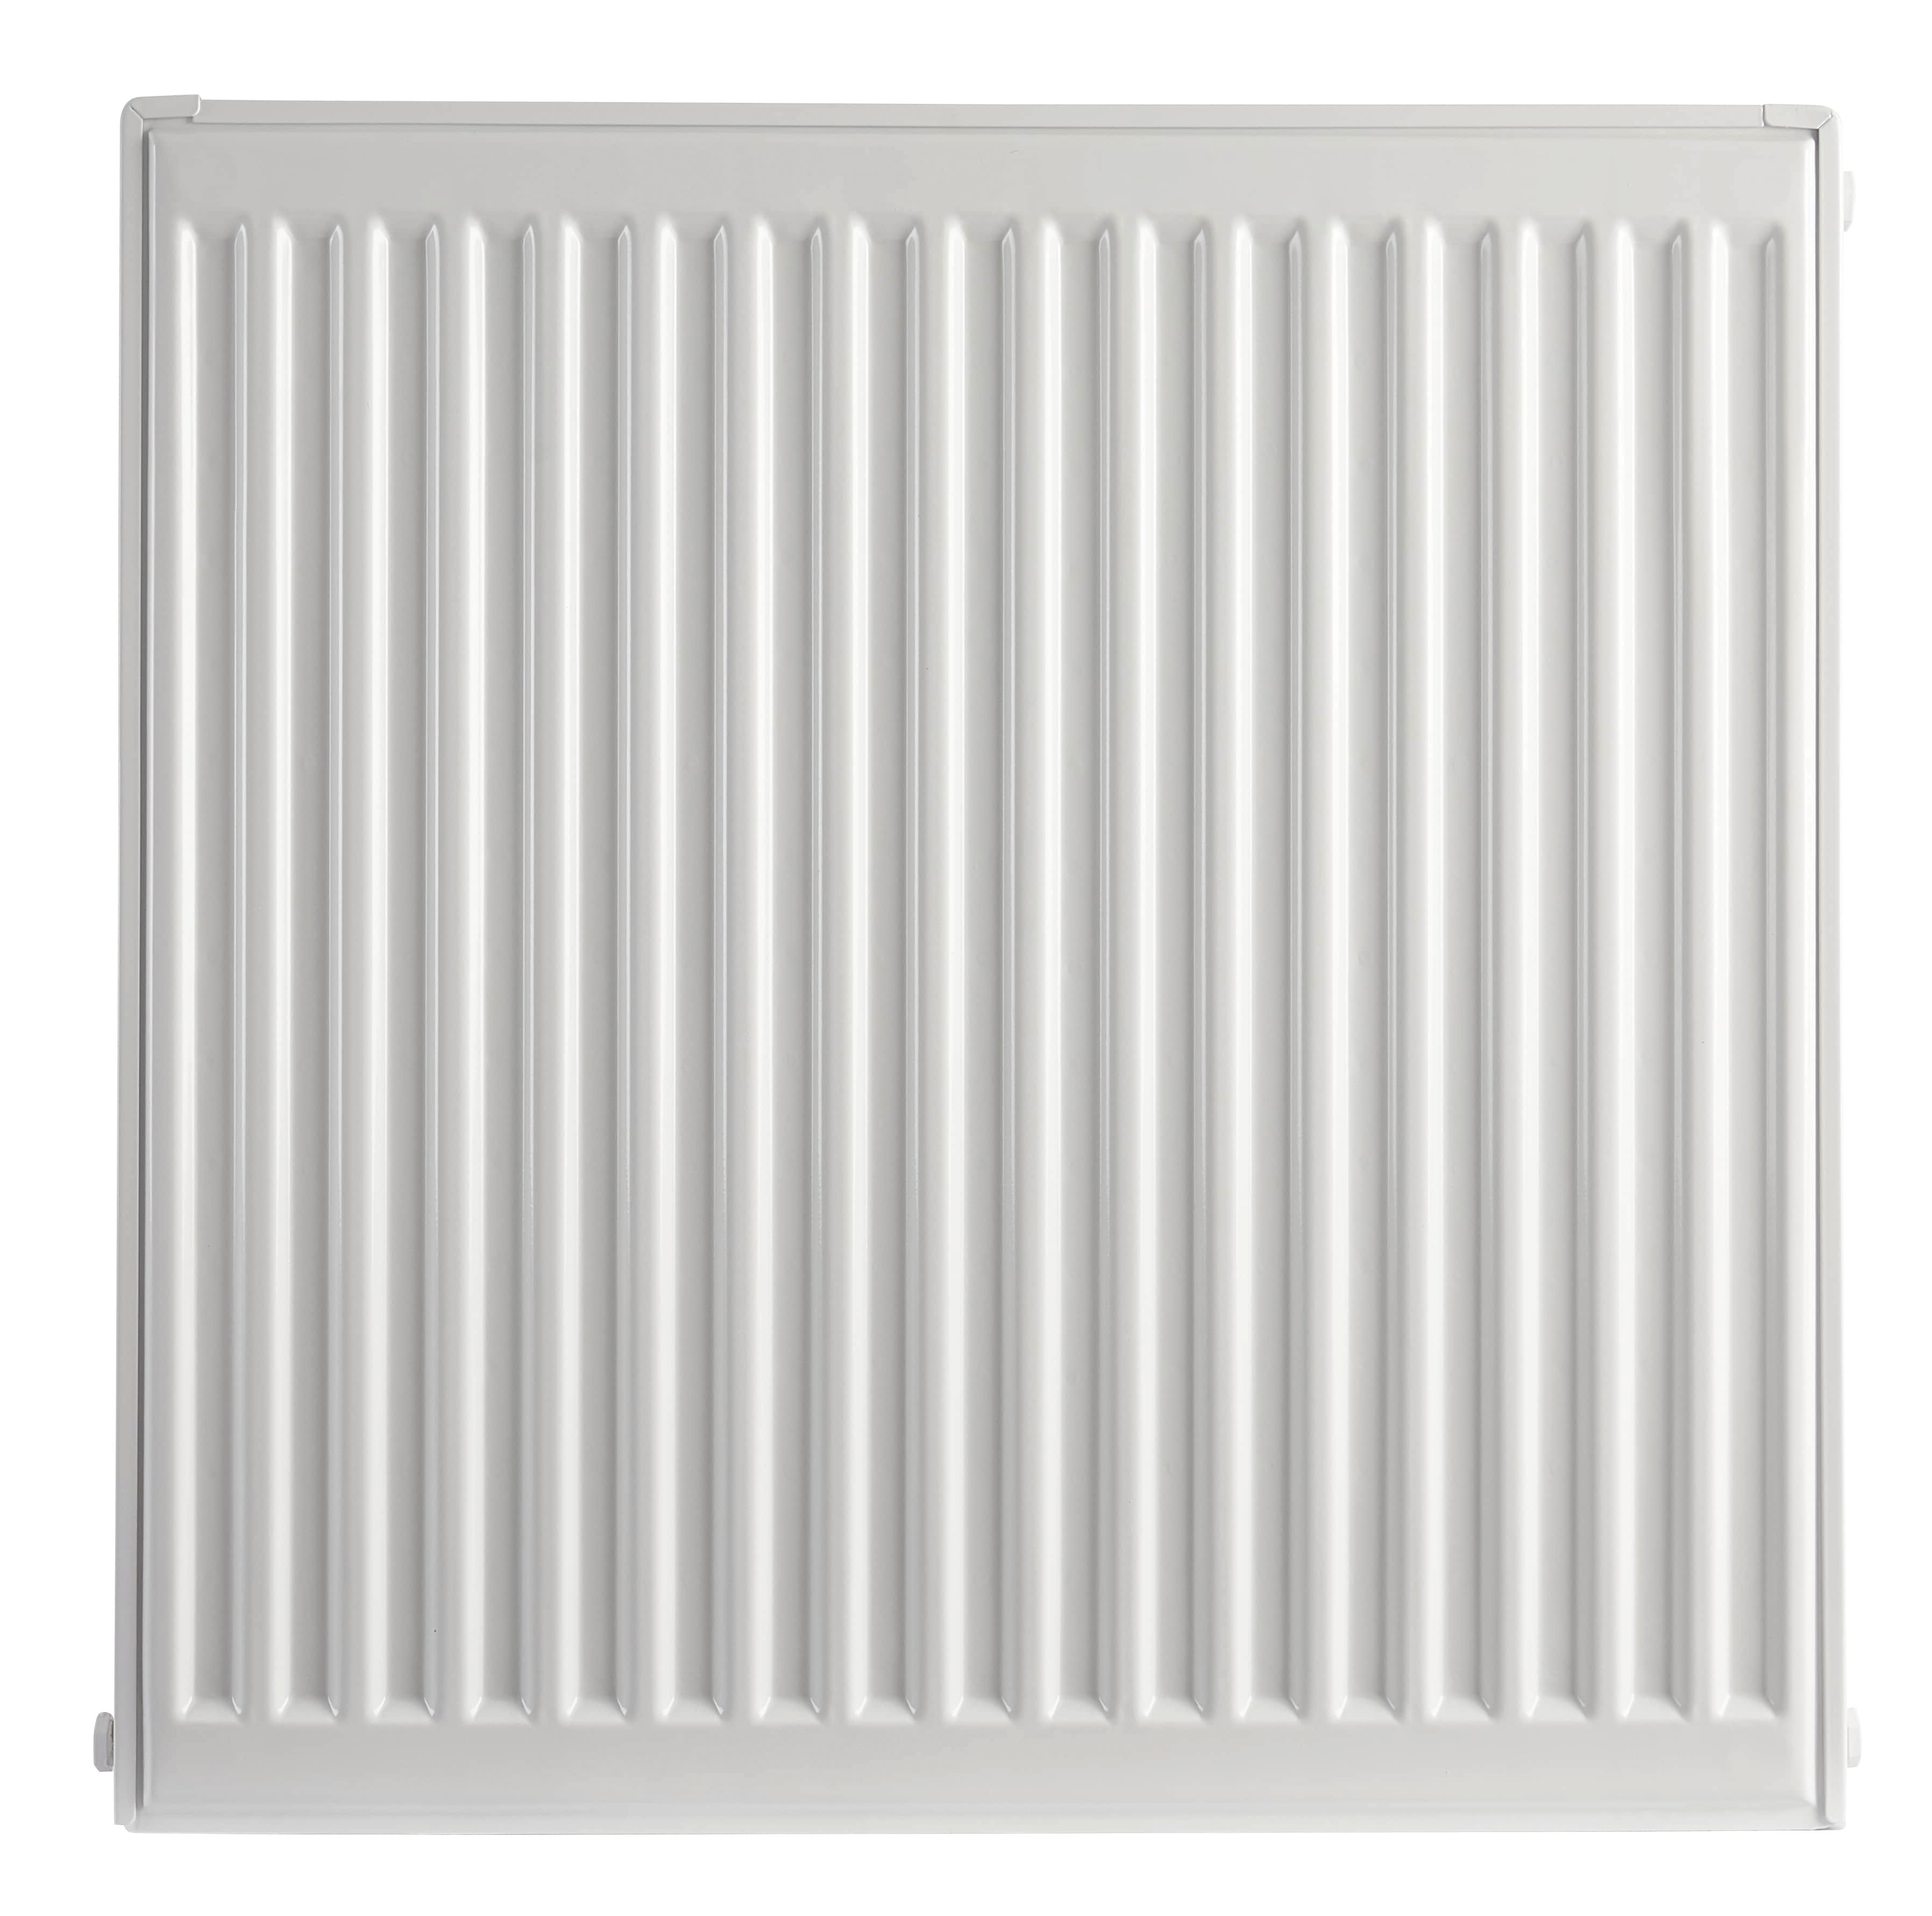 Image of Homeline by Stelrad 600 x 500mm Type 11 Single Panel Single Convector Radiator